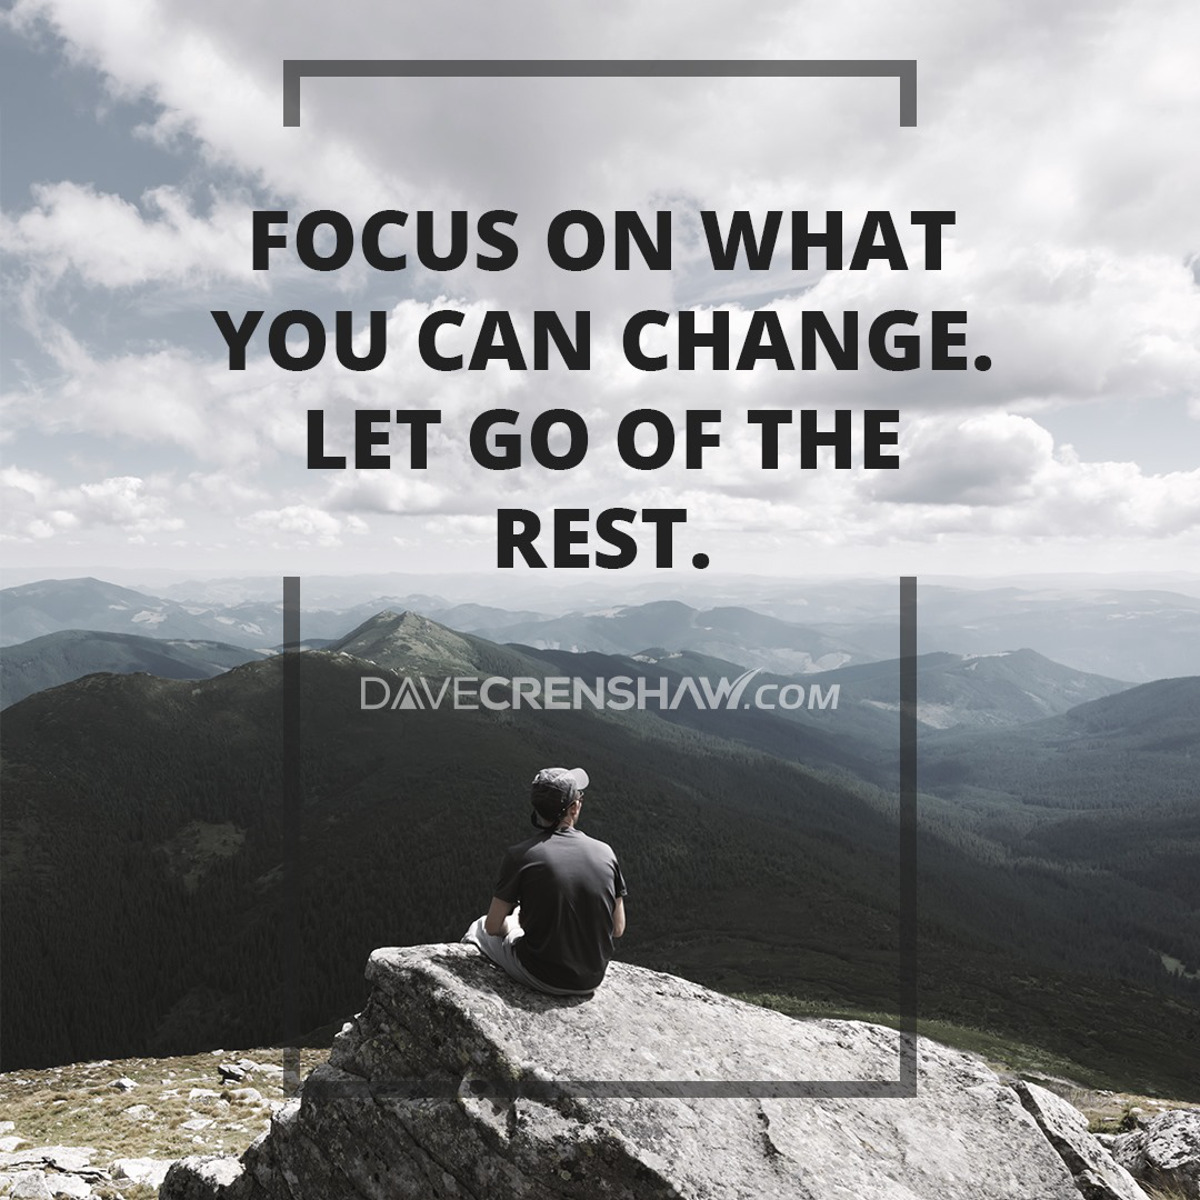 Focus on what you can change. Let go of the rest.